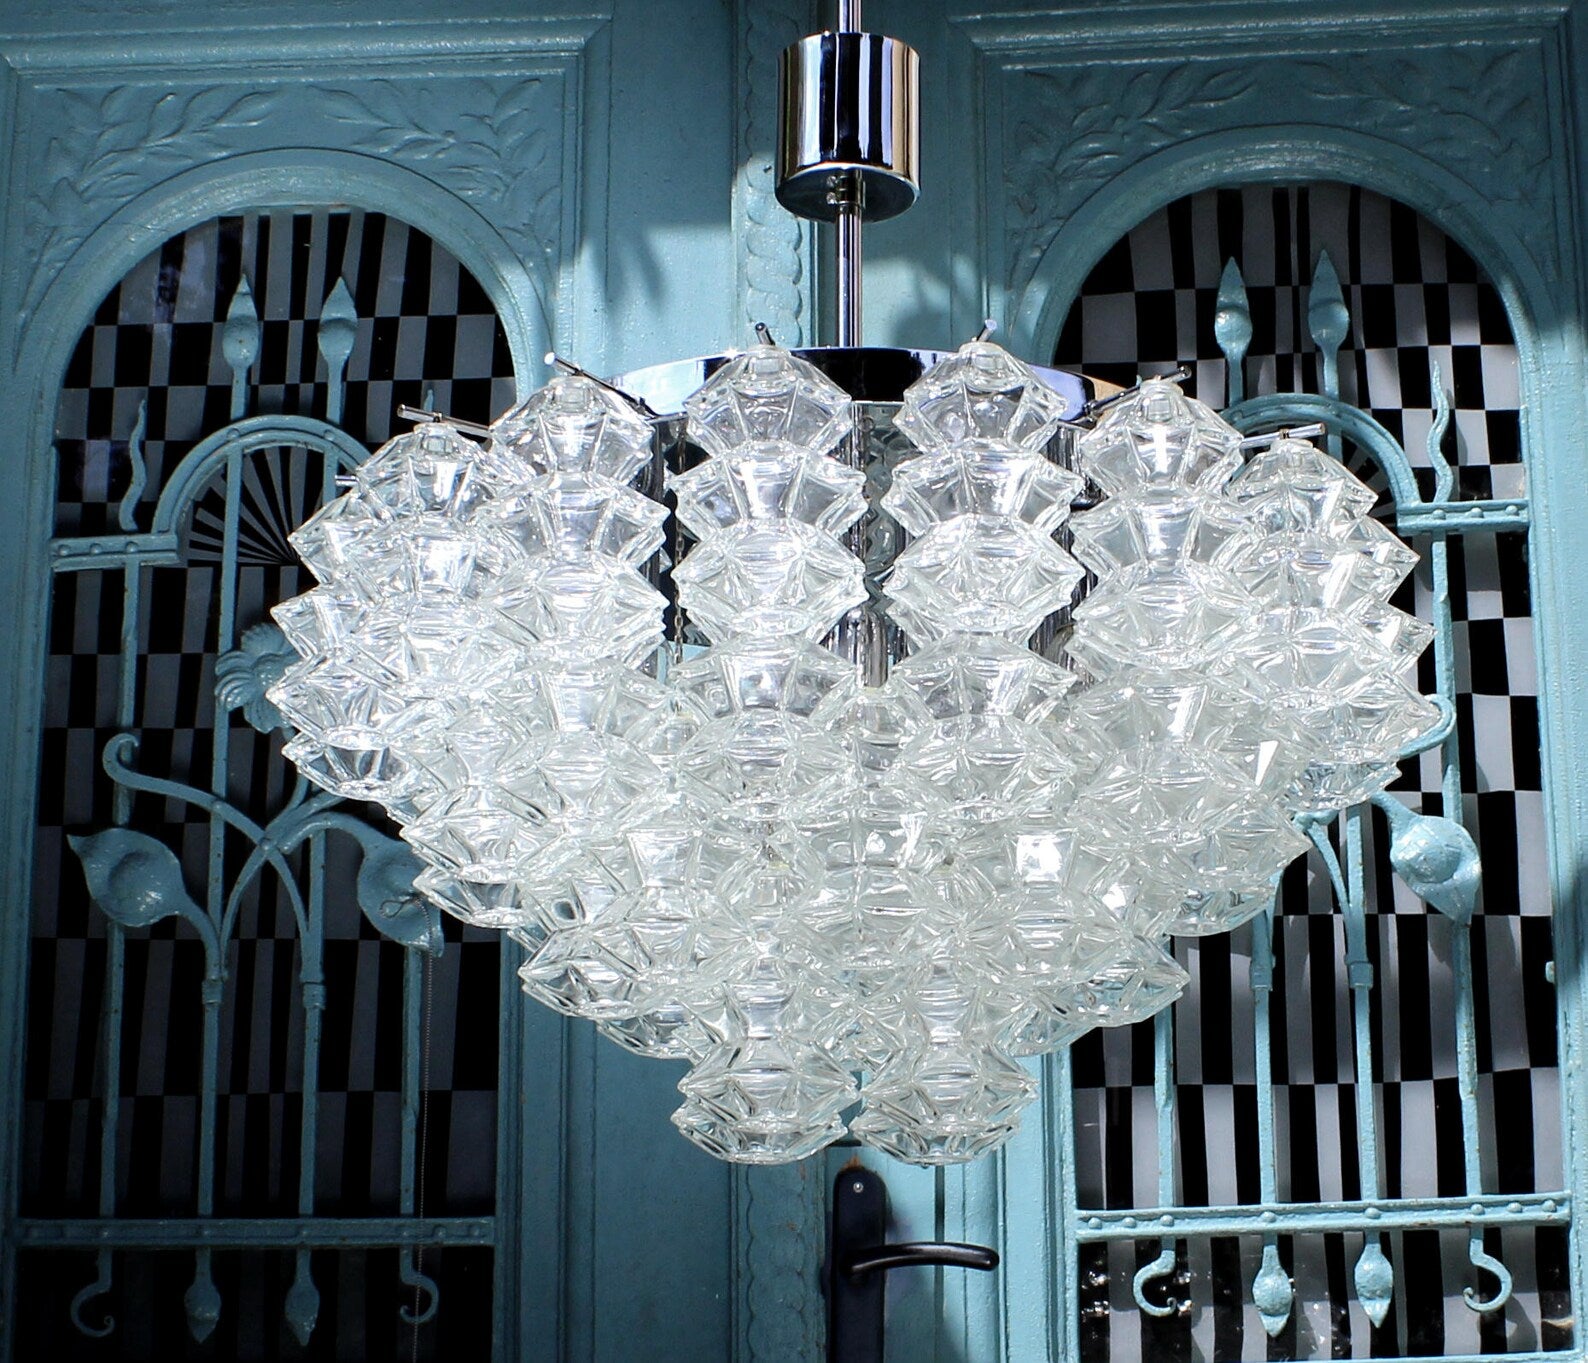 VERY RARE ELEGANT 12 LIGHTS (E14) FINE CRYSTAL CHANDELIER 1970´s KALMAR / VIENNA / AUSTRIA. 12 LIGHTS & 40 GRAND GLASS CACTUS FRUITS

DIAMETER 21 INCHES HEIGHT OF THE BODY 13 INCHES ORIGINAL HEIGHT 44 INCHES

This fine chandelier ( als for use